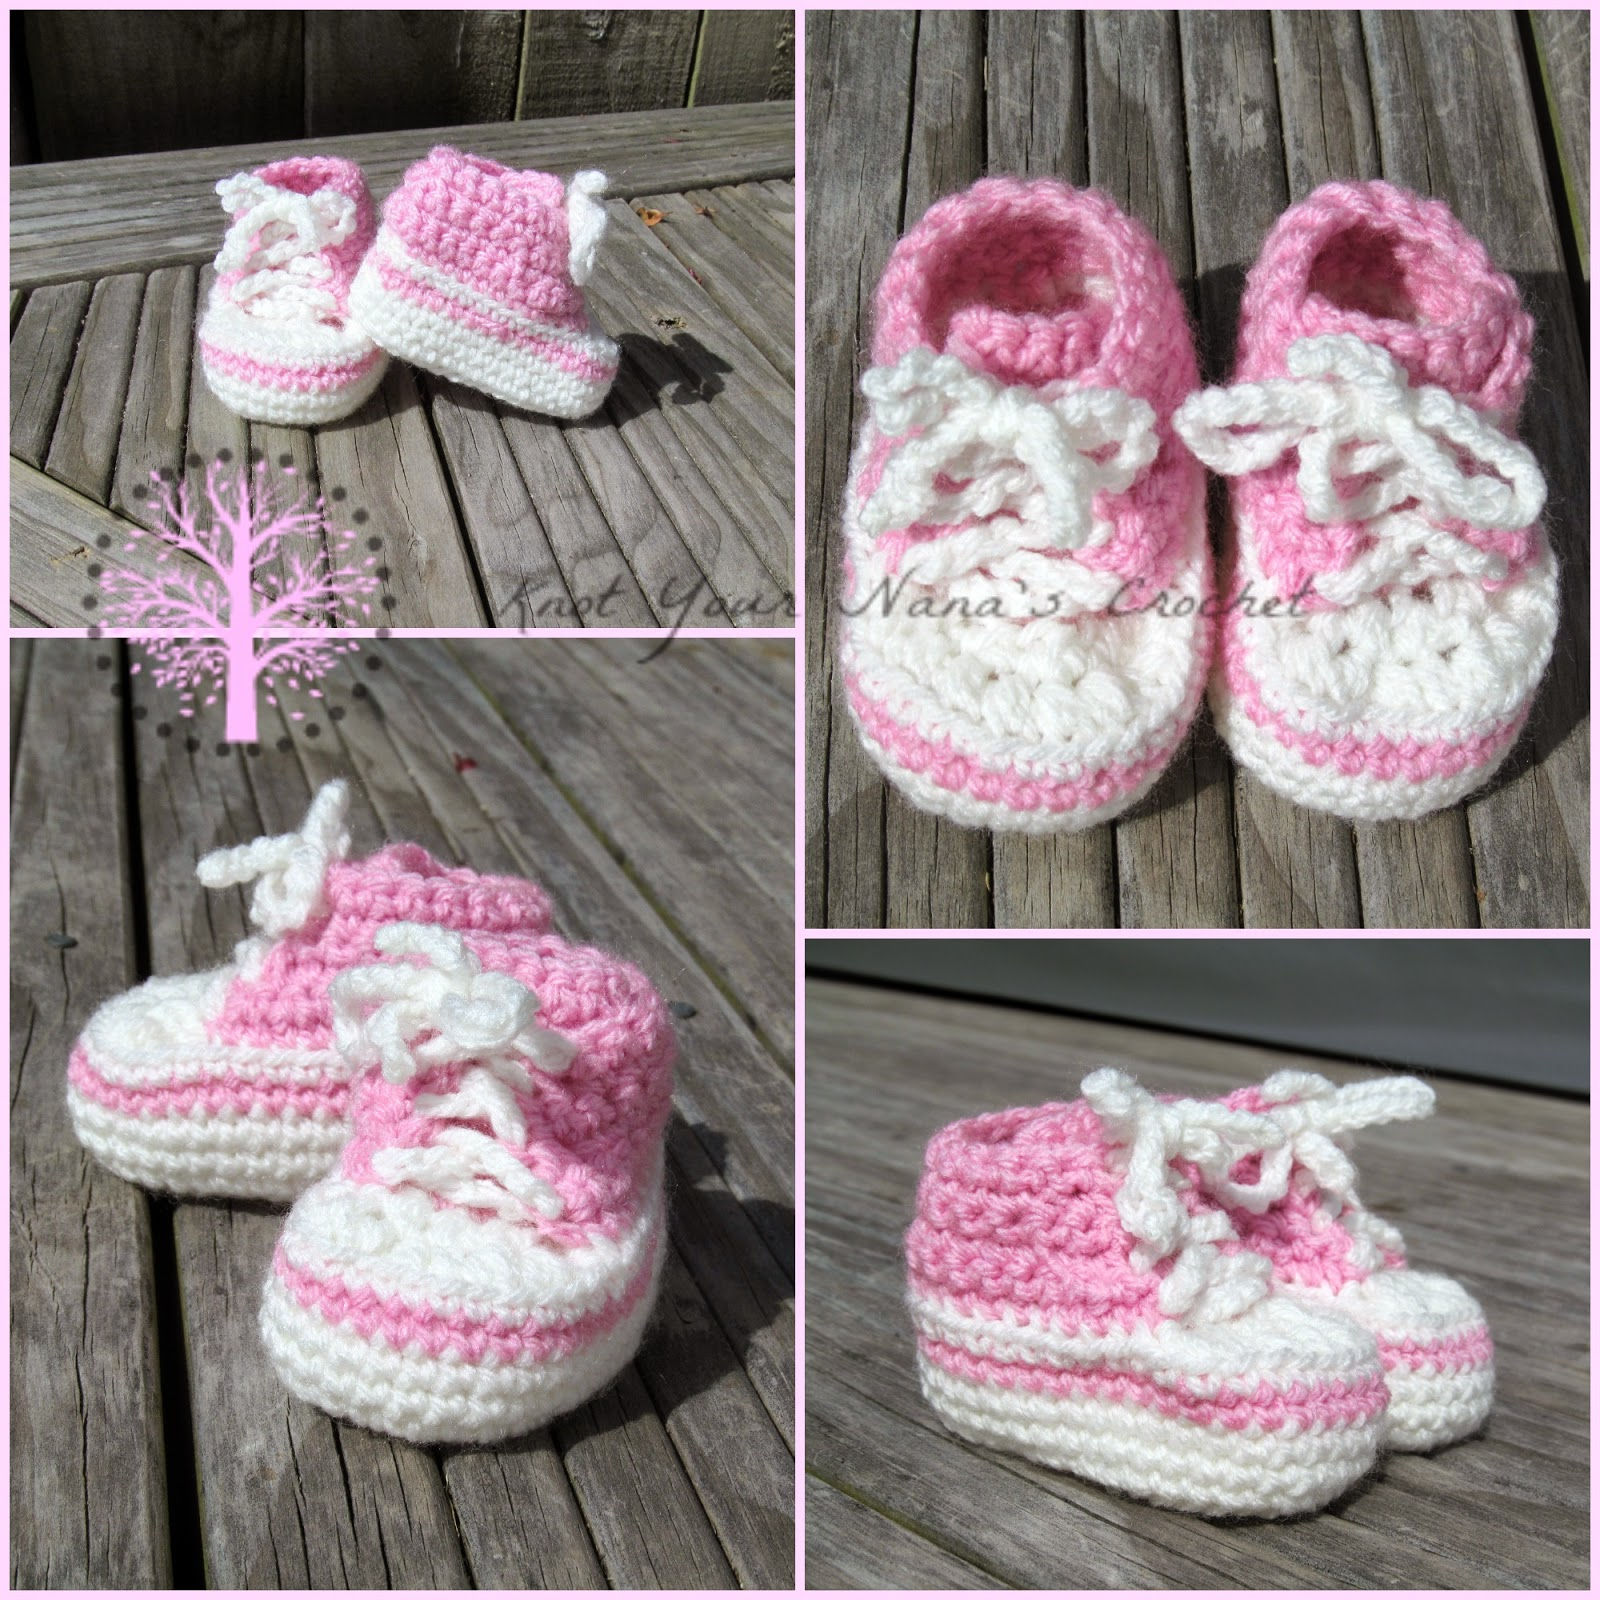 40+ Adorable and FREE Crochet Baby Booties Patterns --> Crochet Converse Newborn High Tops